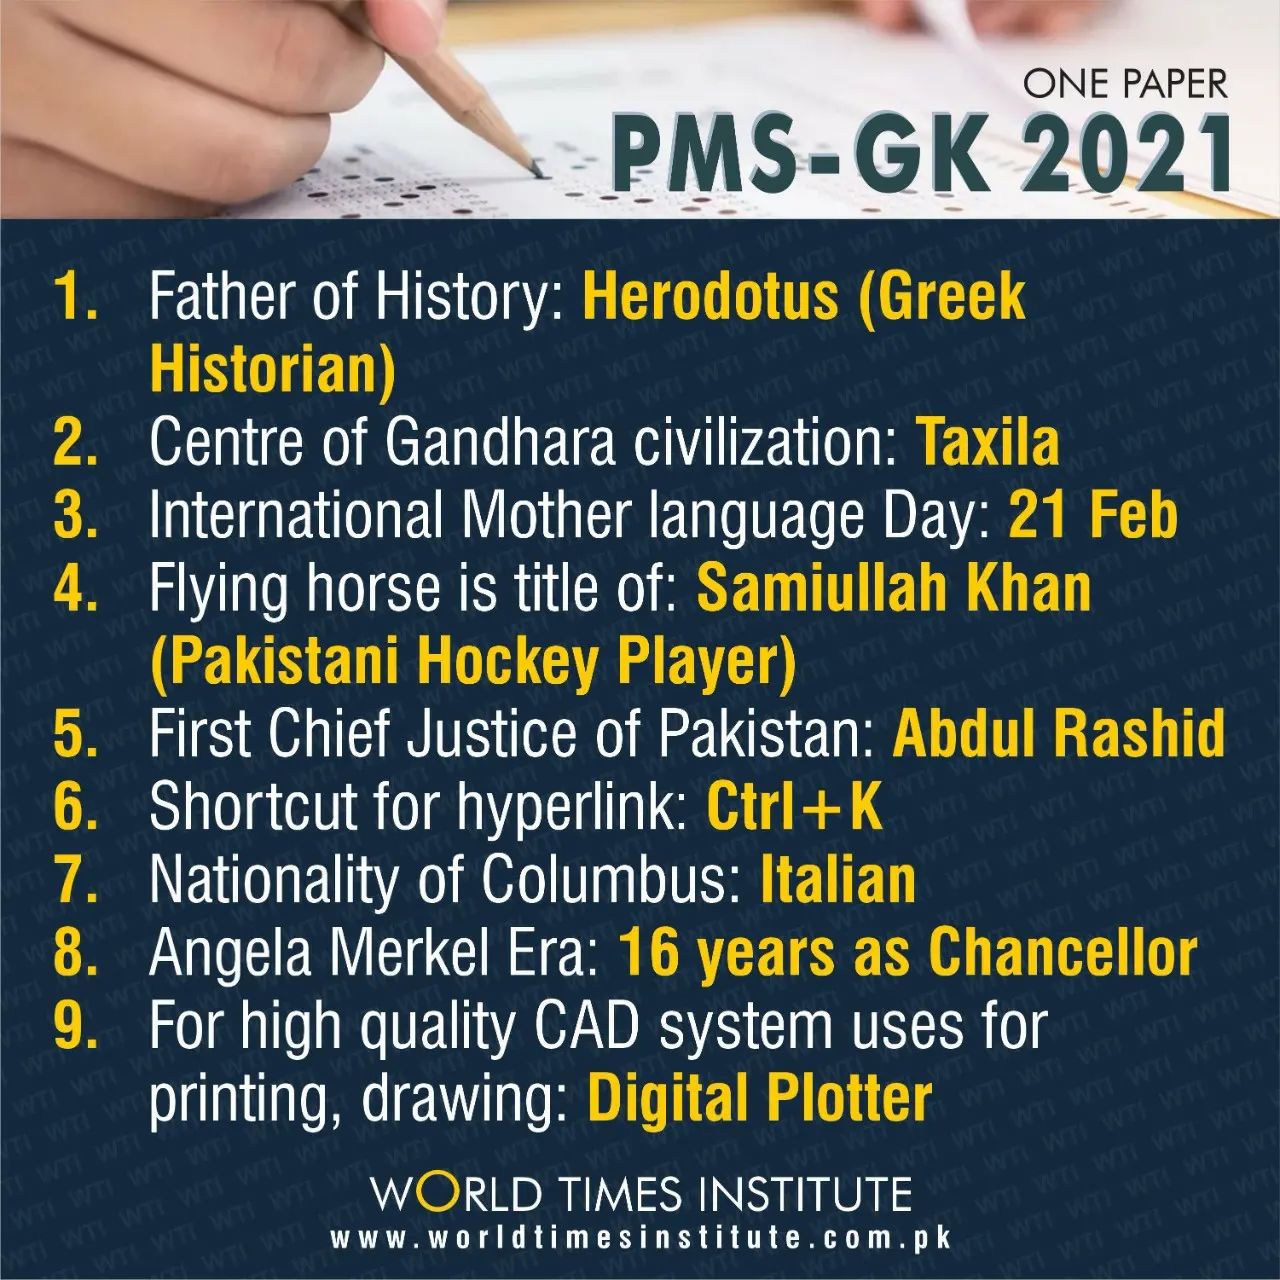 You are currently viewing ONE PAPER PMS-GK 2021 28-07-2022